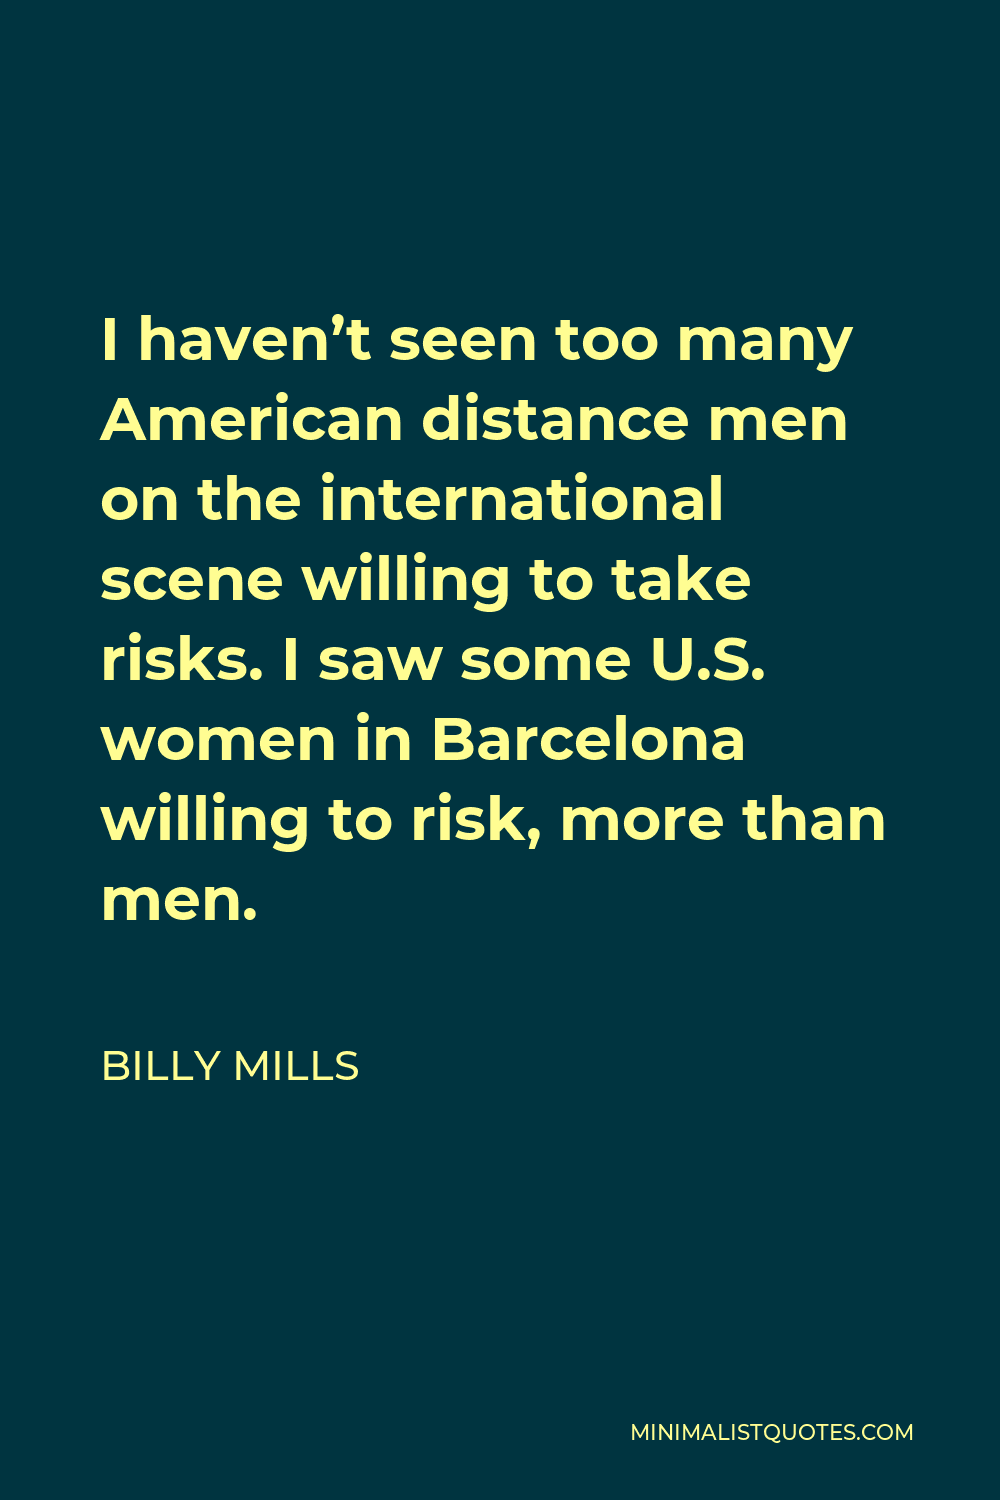 Billy Mills Quote - I haven’t seen too many American distance men on the international scene willing to take risks. I saw some U.S. women in Barcelona willing to risk, more than men.